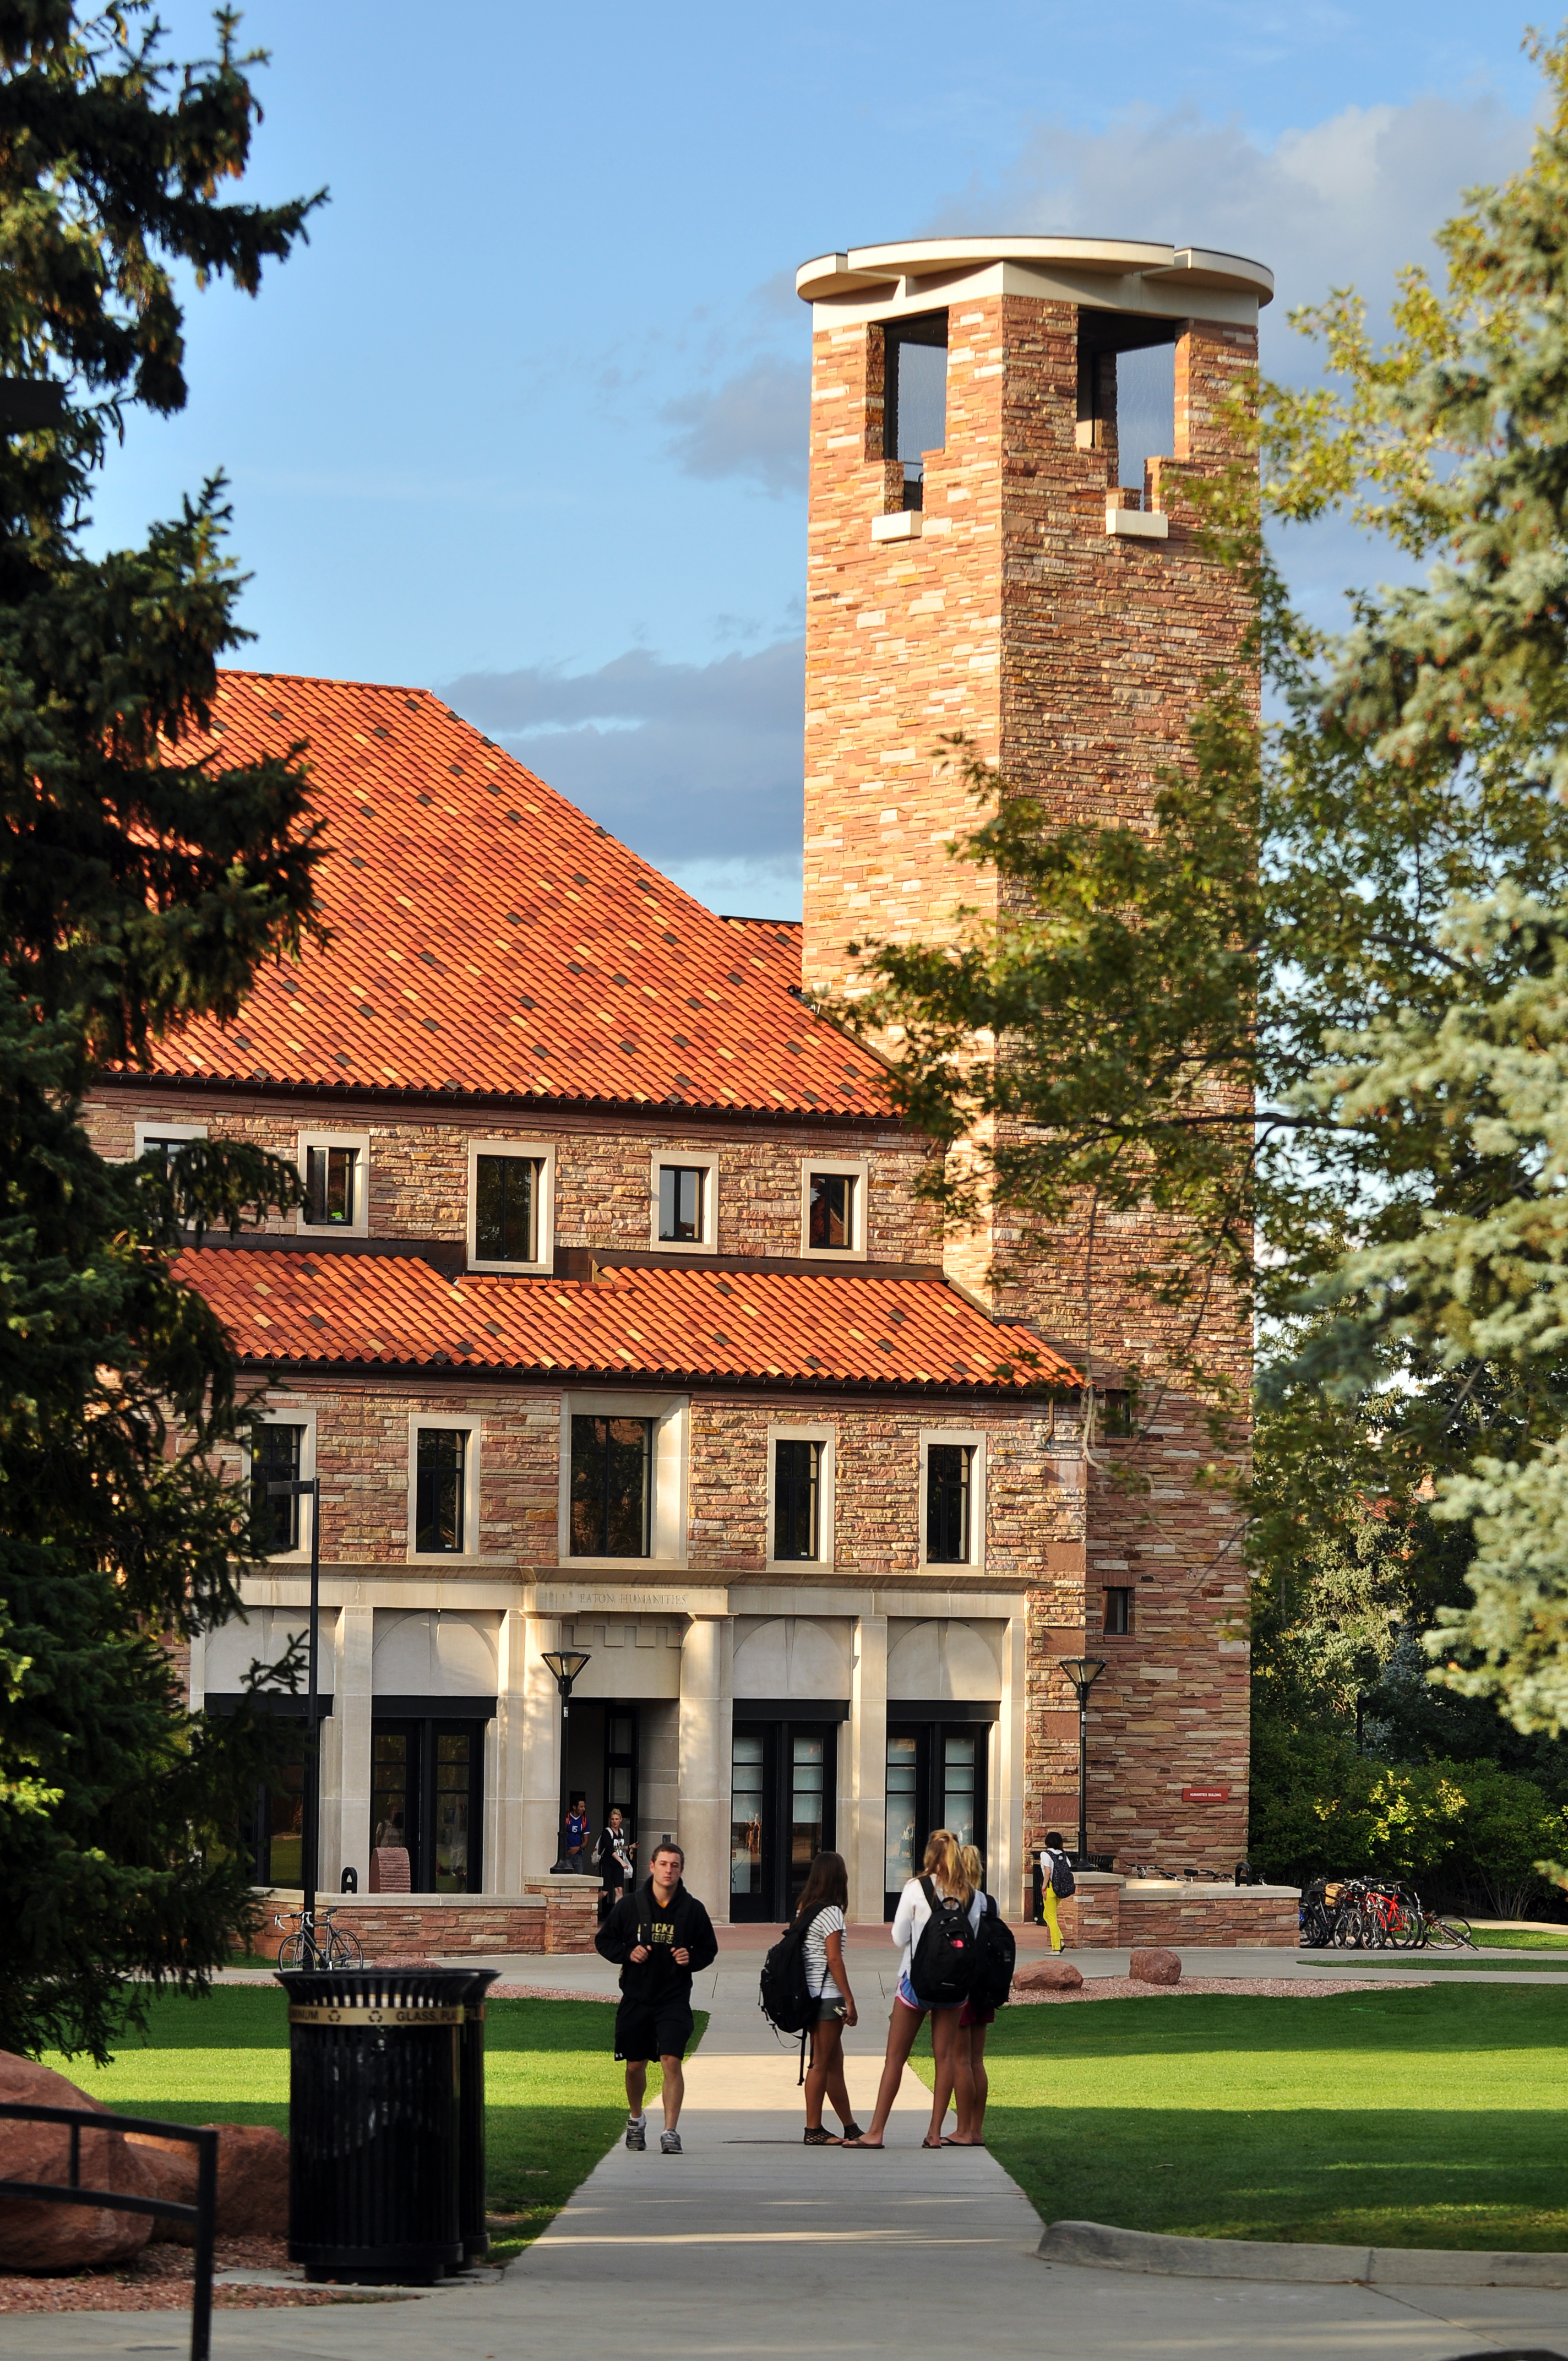 Eaton Humanities building on the CU Boulder campus.